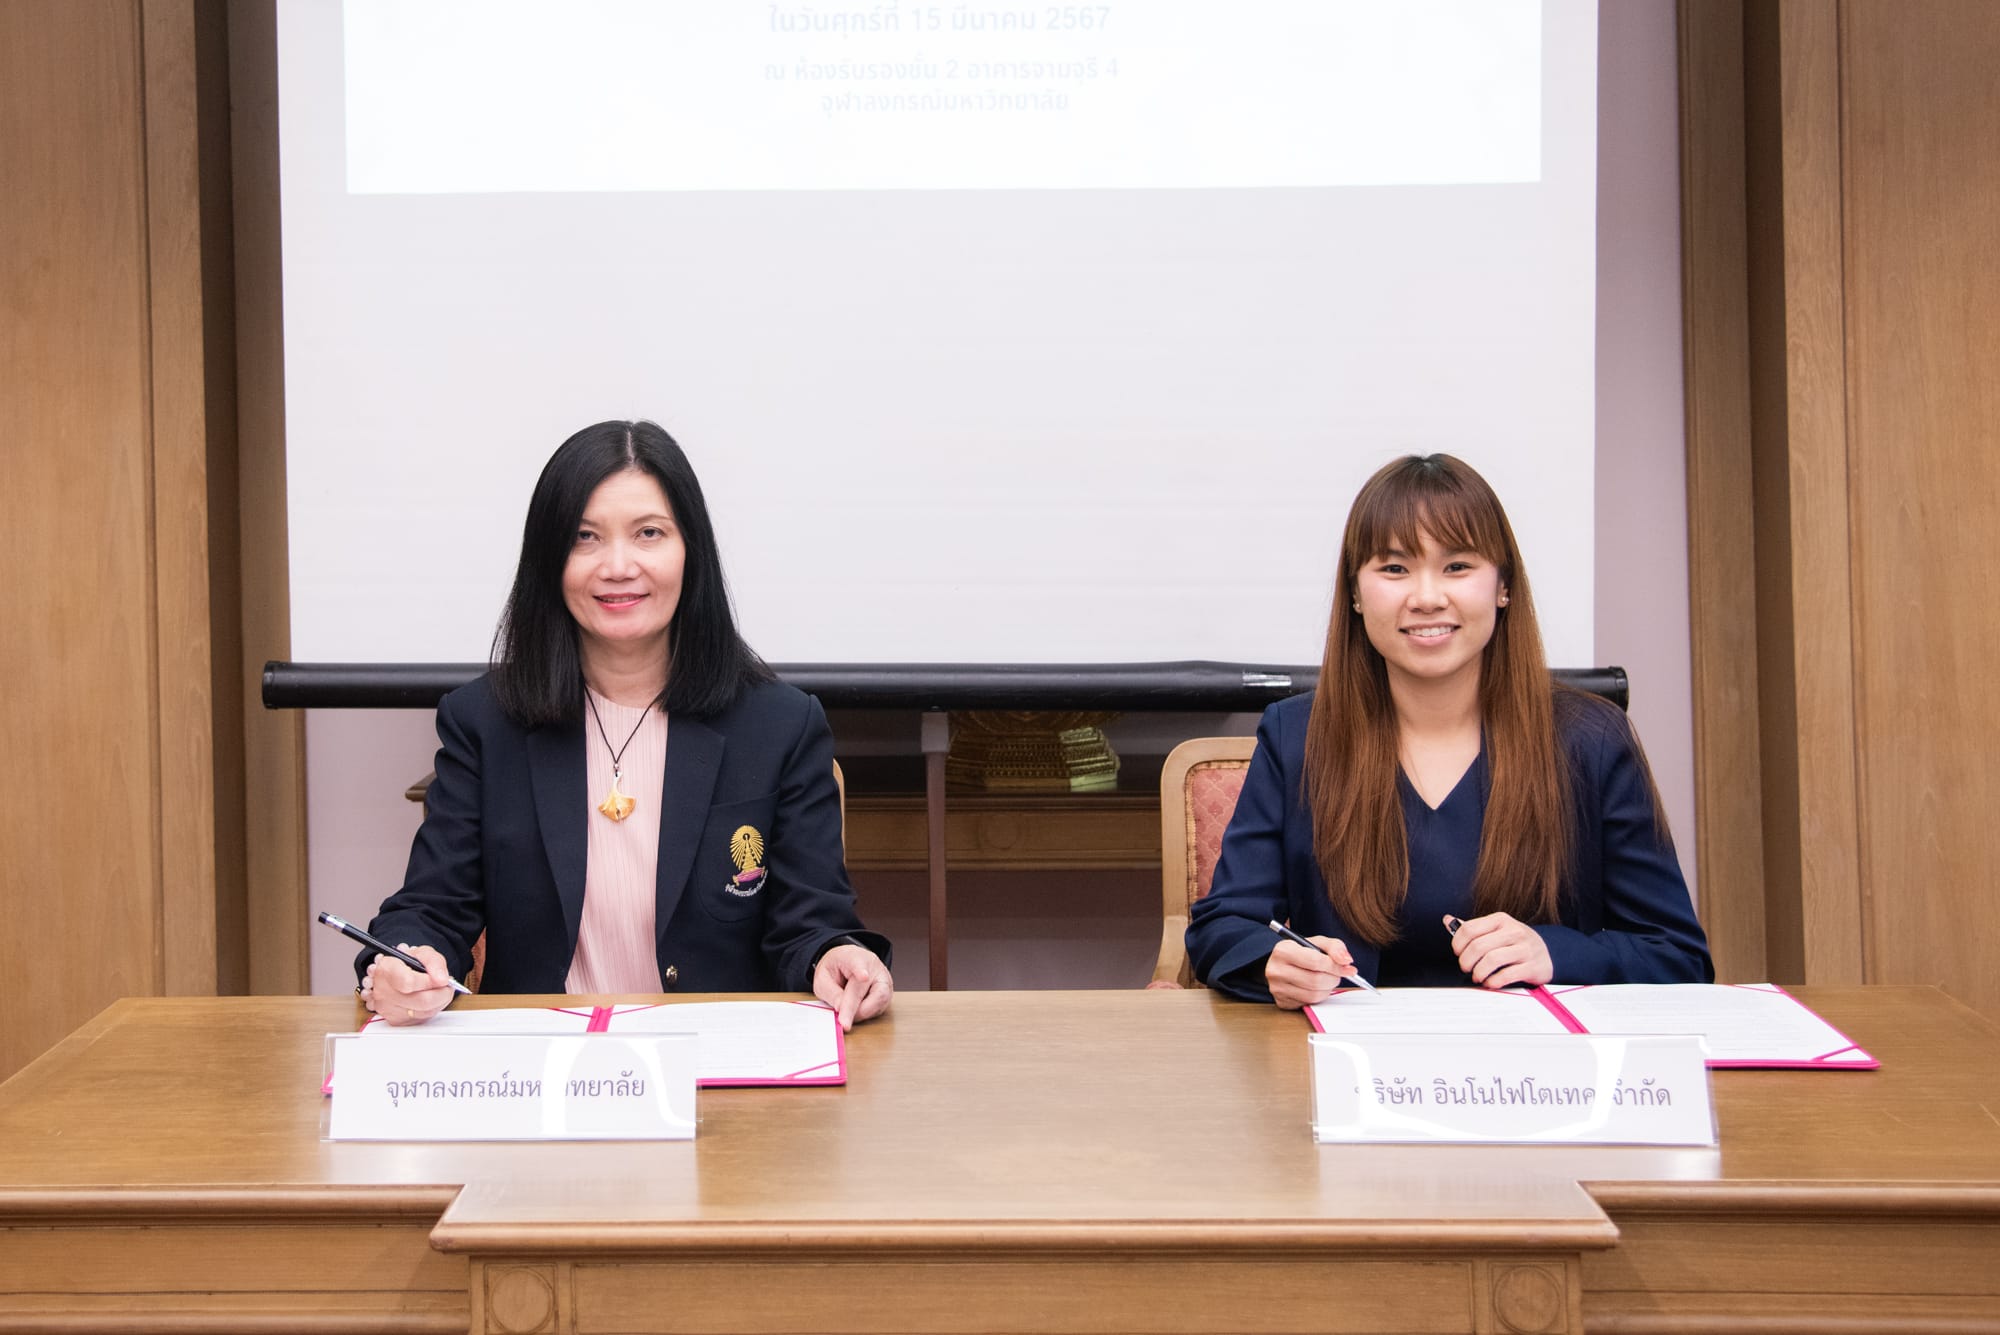 Chulalongkorn University’s Vice President for Strategic Planning, Innovation and Global Engagement Prof. Dr. Kaywalee Chatdarong and CEO of Innophytotech Co., Ltd. Ms. Kedtida Cheevarungnapakul, signed an agreement to gain rights under the petty patent owned by Chulalongkorn University.